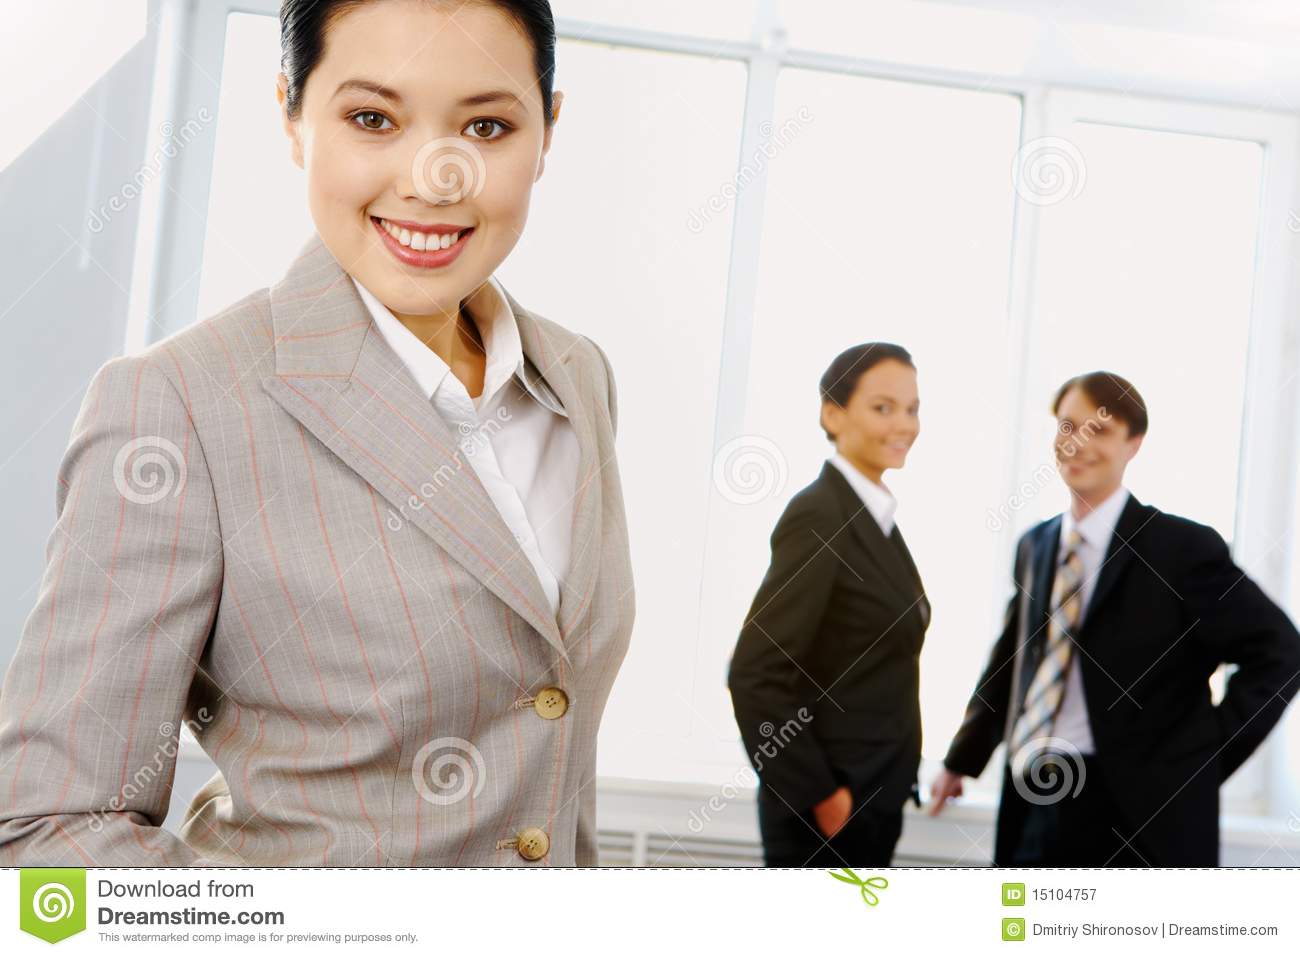 Female Leader Royalty Free Stock Photography   Image  15104757